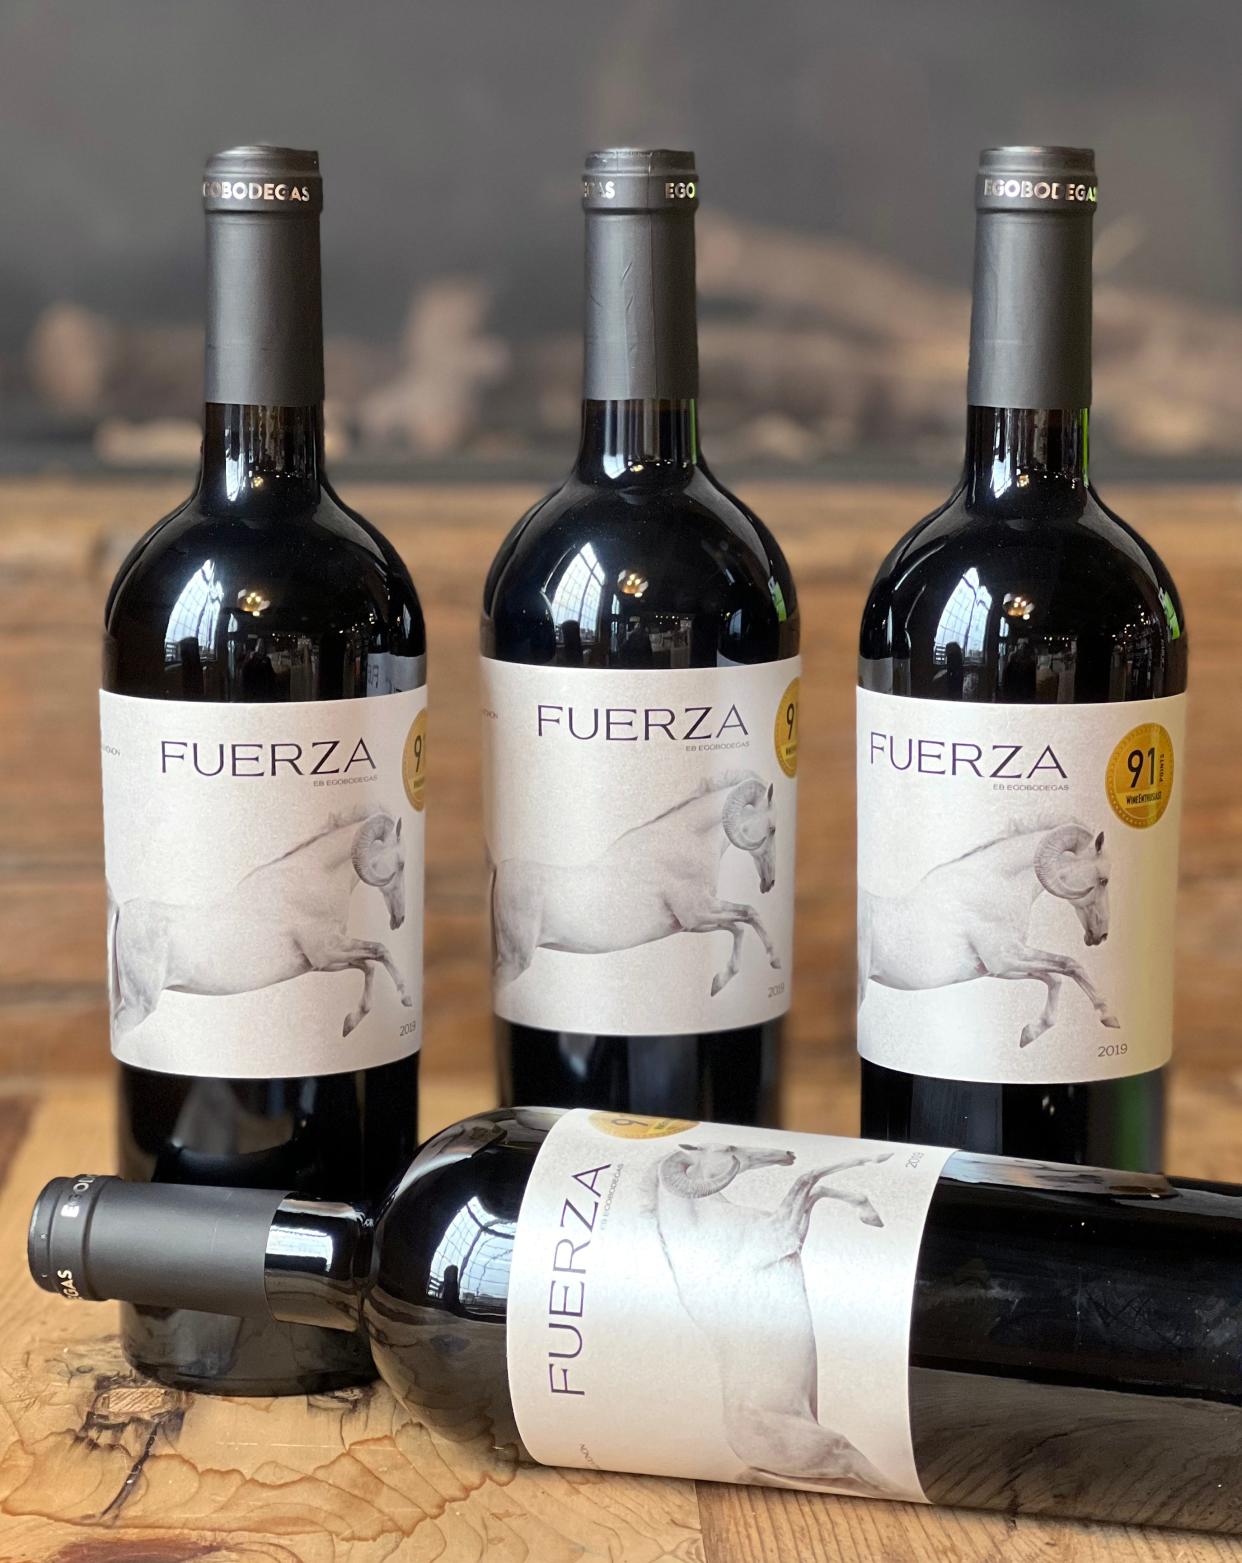 Fuerza red blend from Jumilla, Spain, is a tremendous value priced under $10.